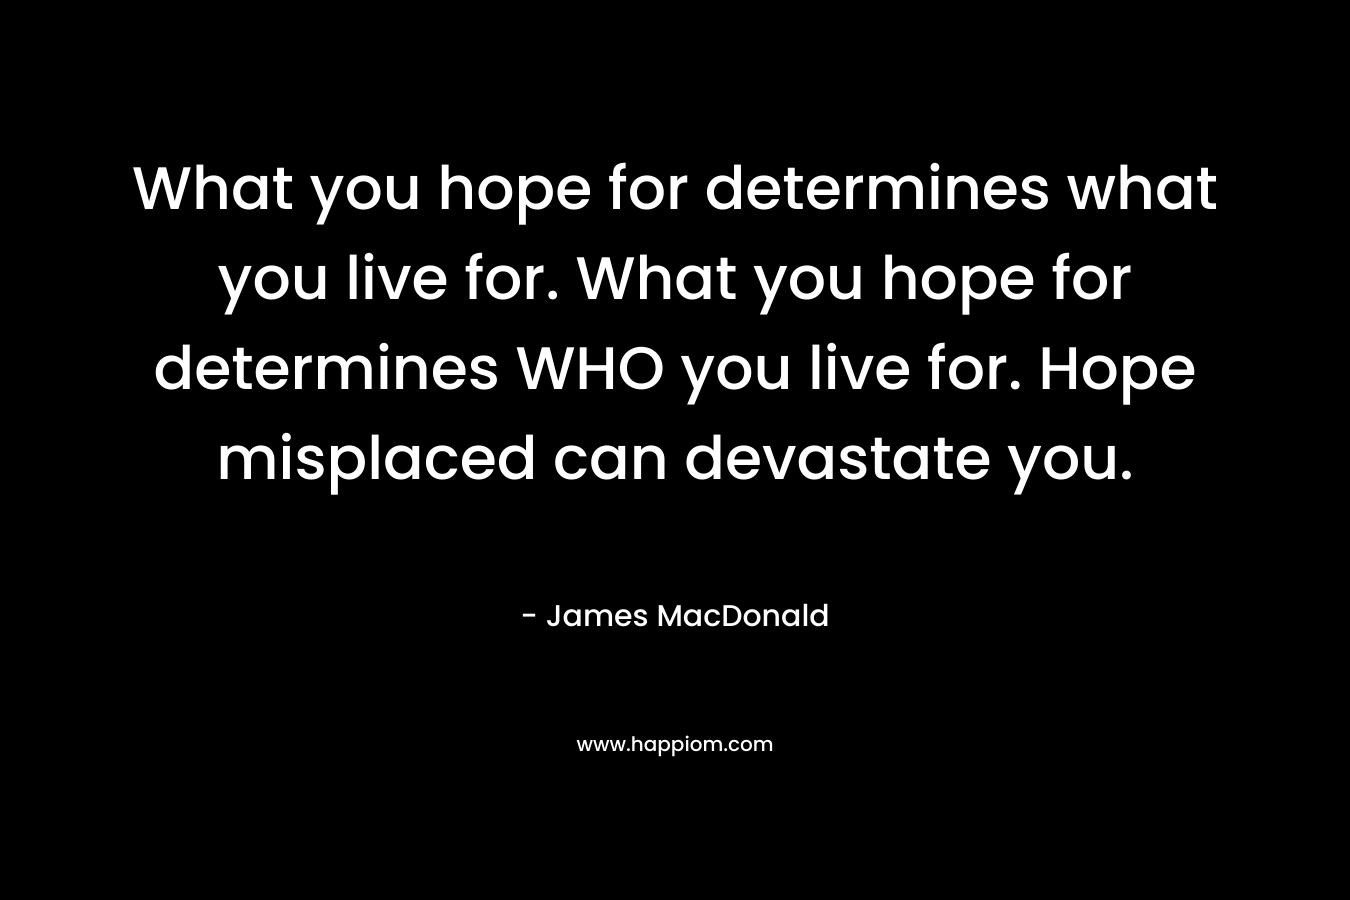 What you hope for determines what you live for. What you hope for determines WHO you live for. Hope misplaced can devastate you.